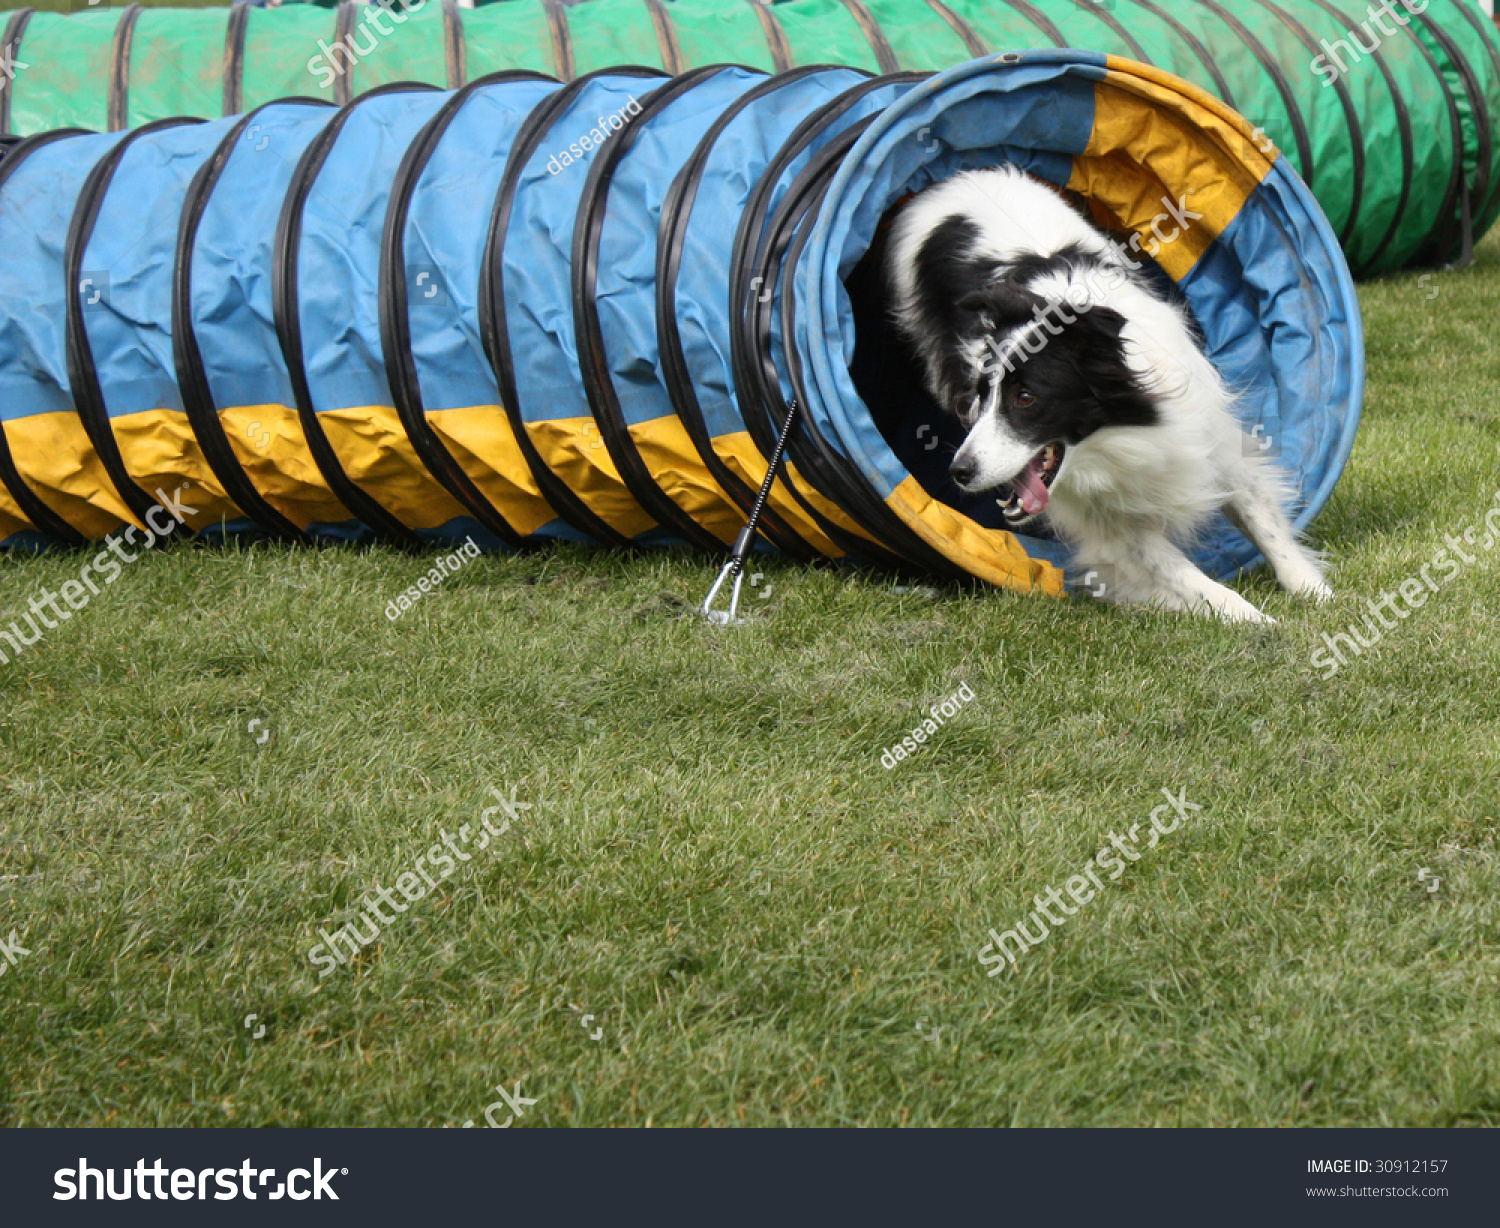 dog running obstacle course